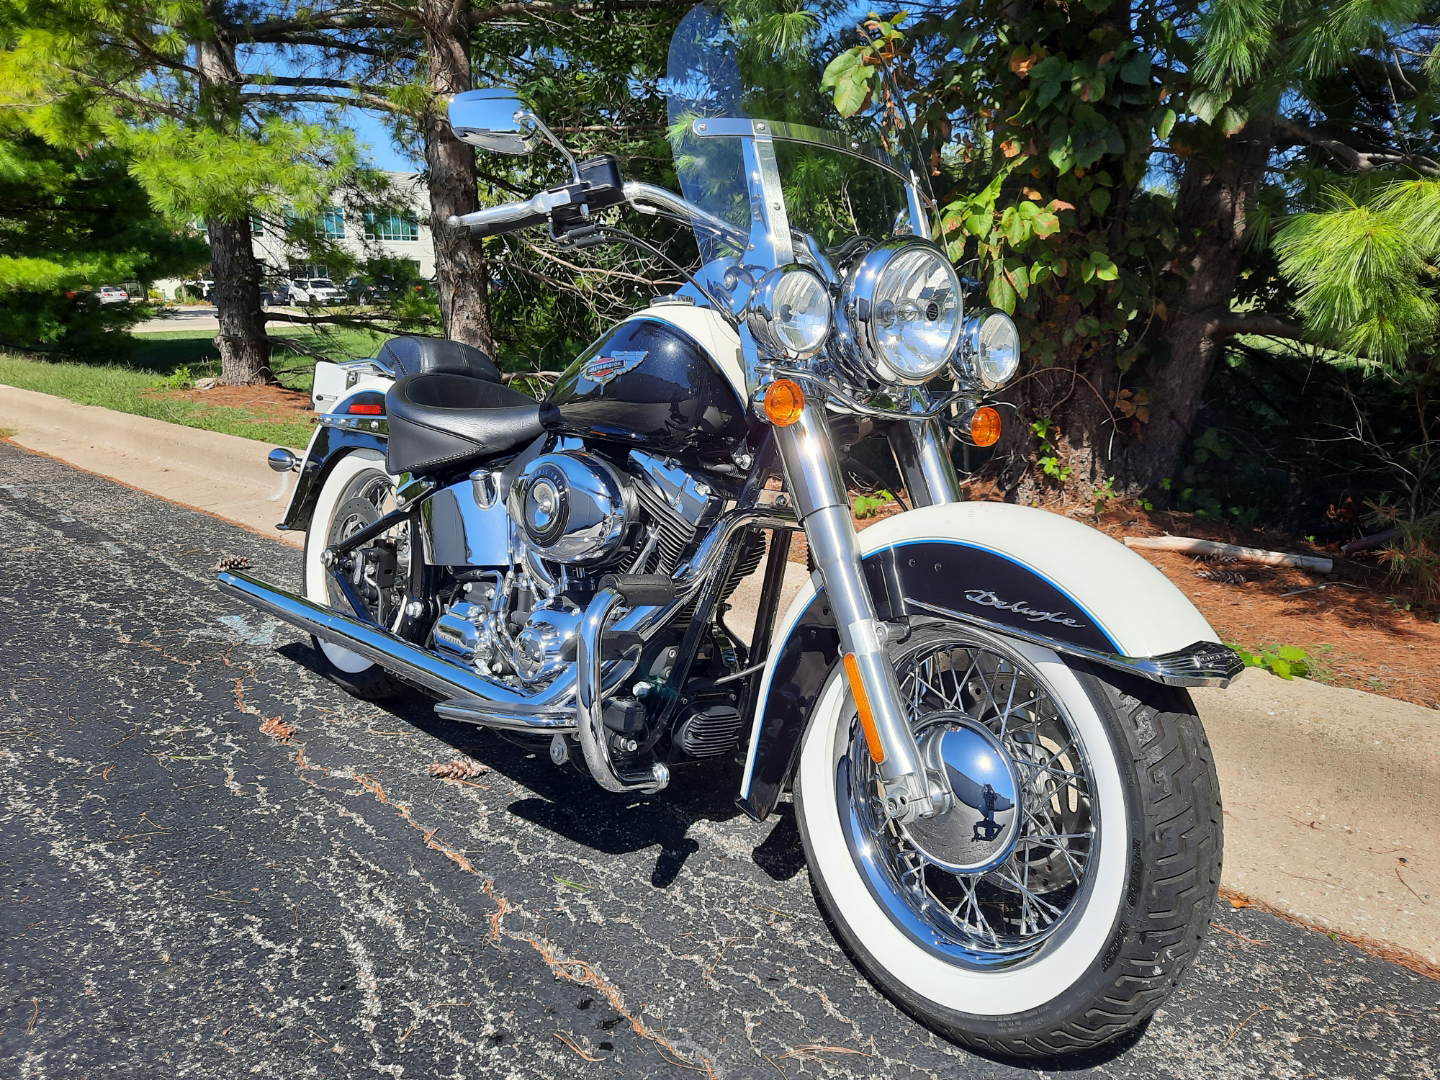 2013 Harley-Davidson Softail® Deluxe in Forsyth, Illinois - Photo 3